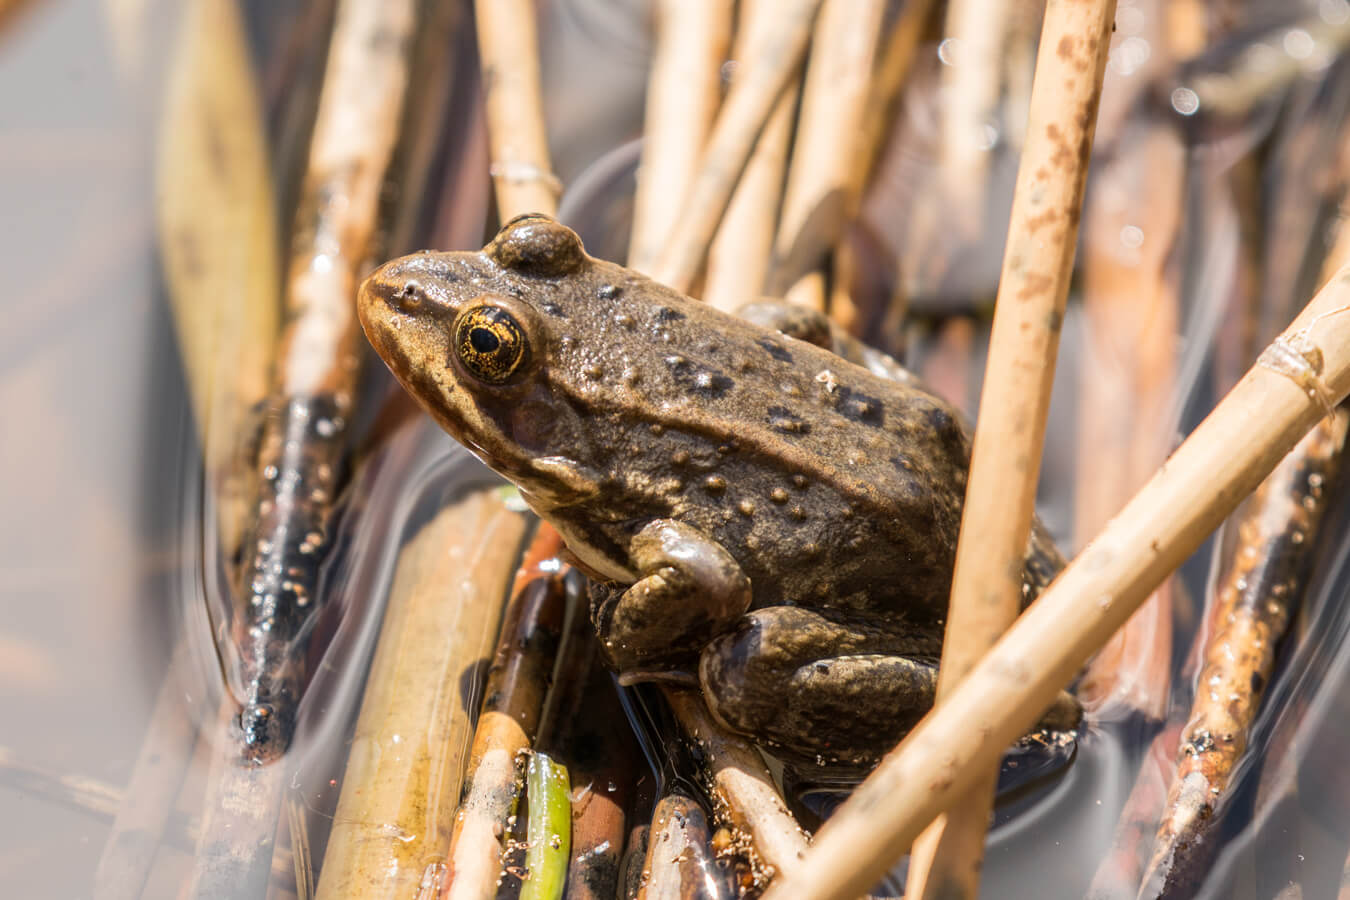 Colombia Spotted Frog, Yellowstone National Park, Idaho, Montana & Wyoming | Photo Credit: Shutterstock / Michelle Holihan